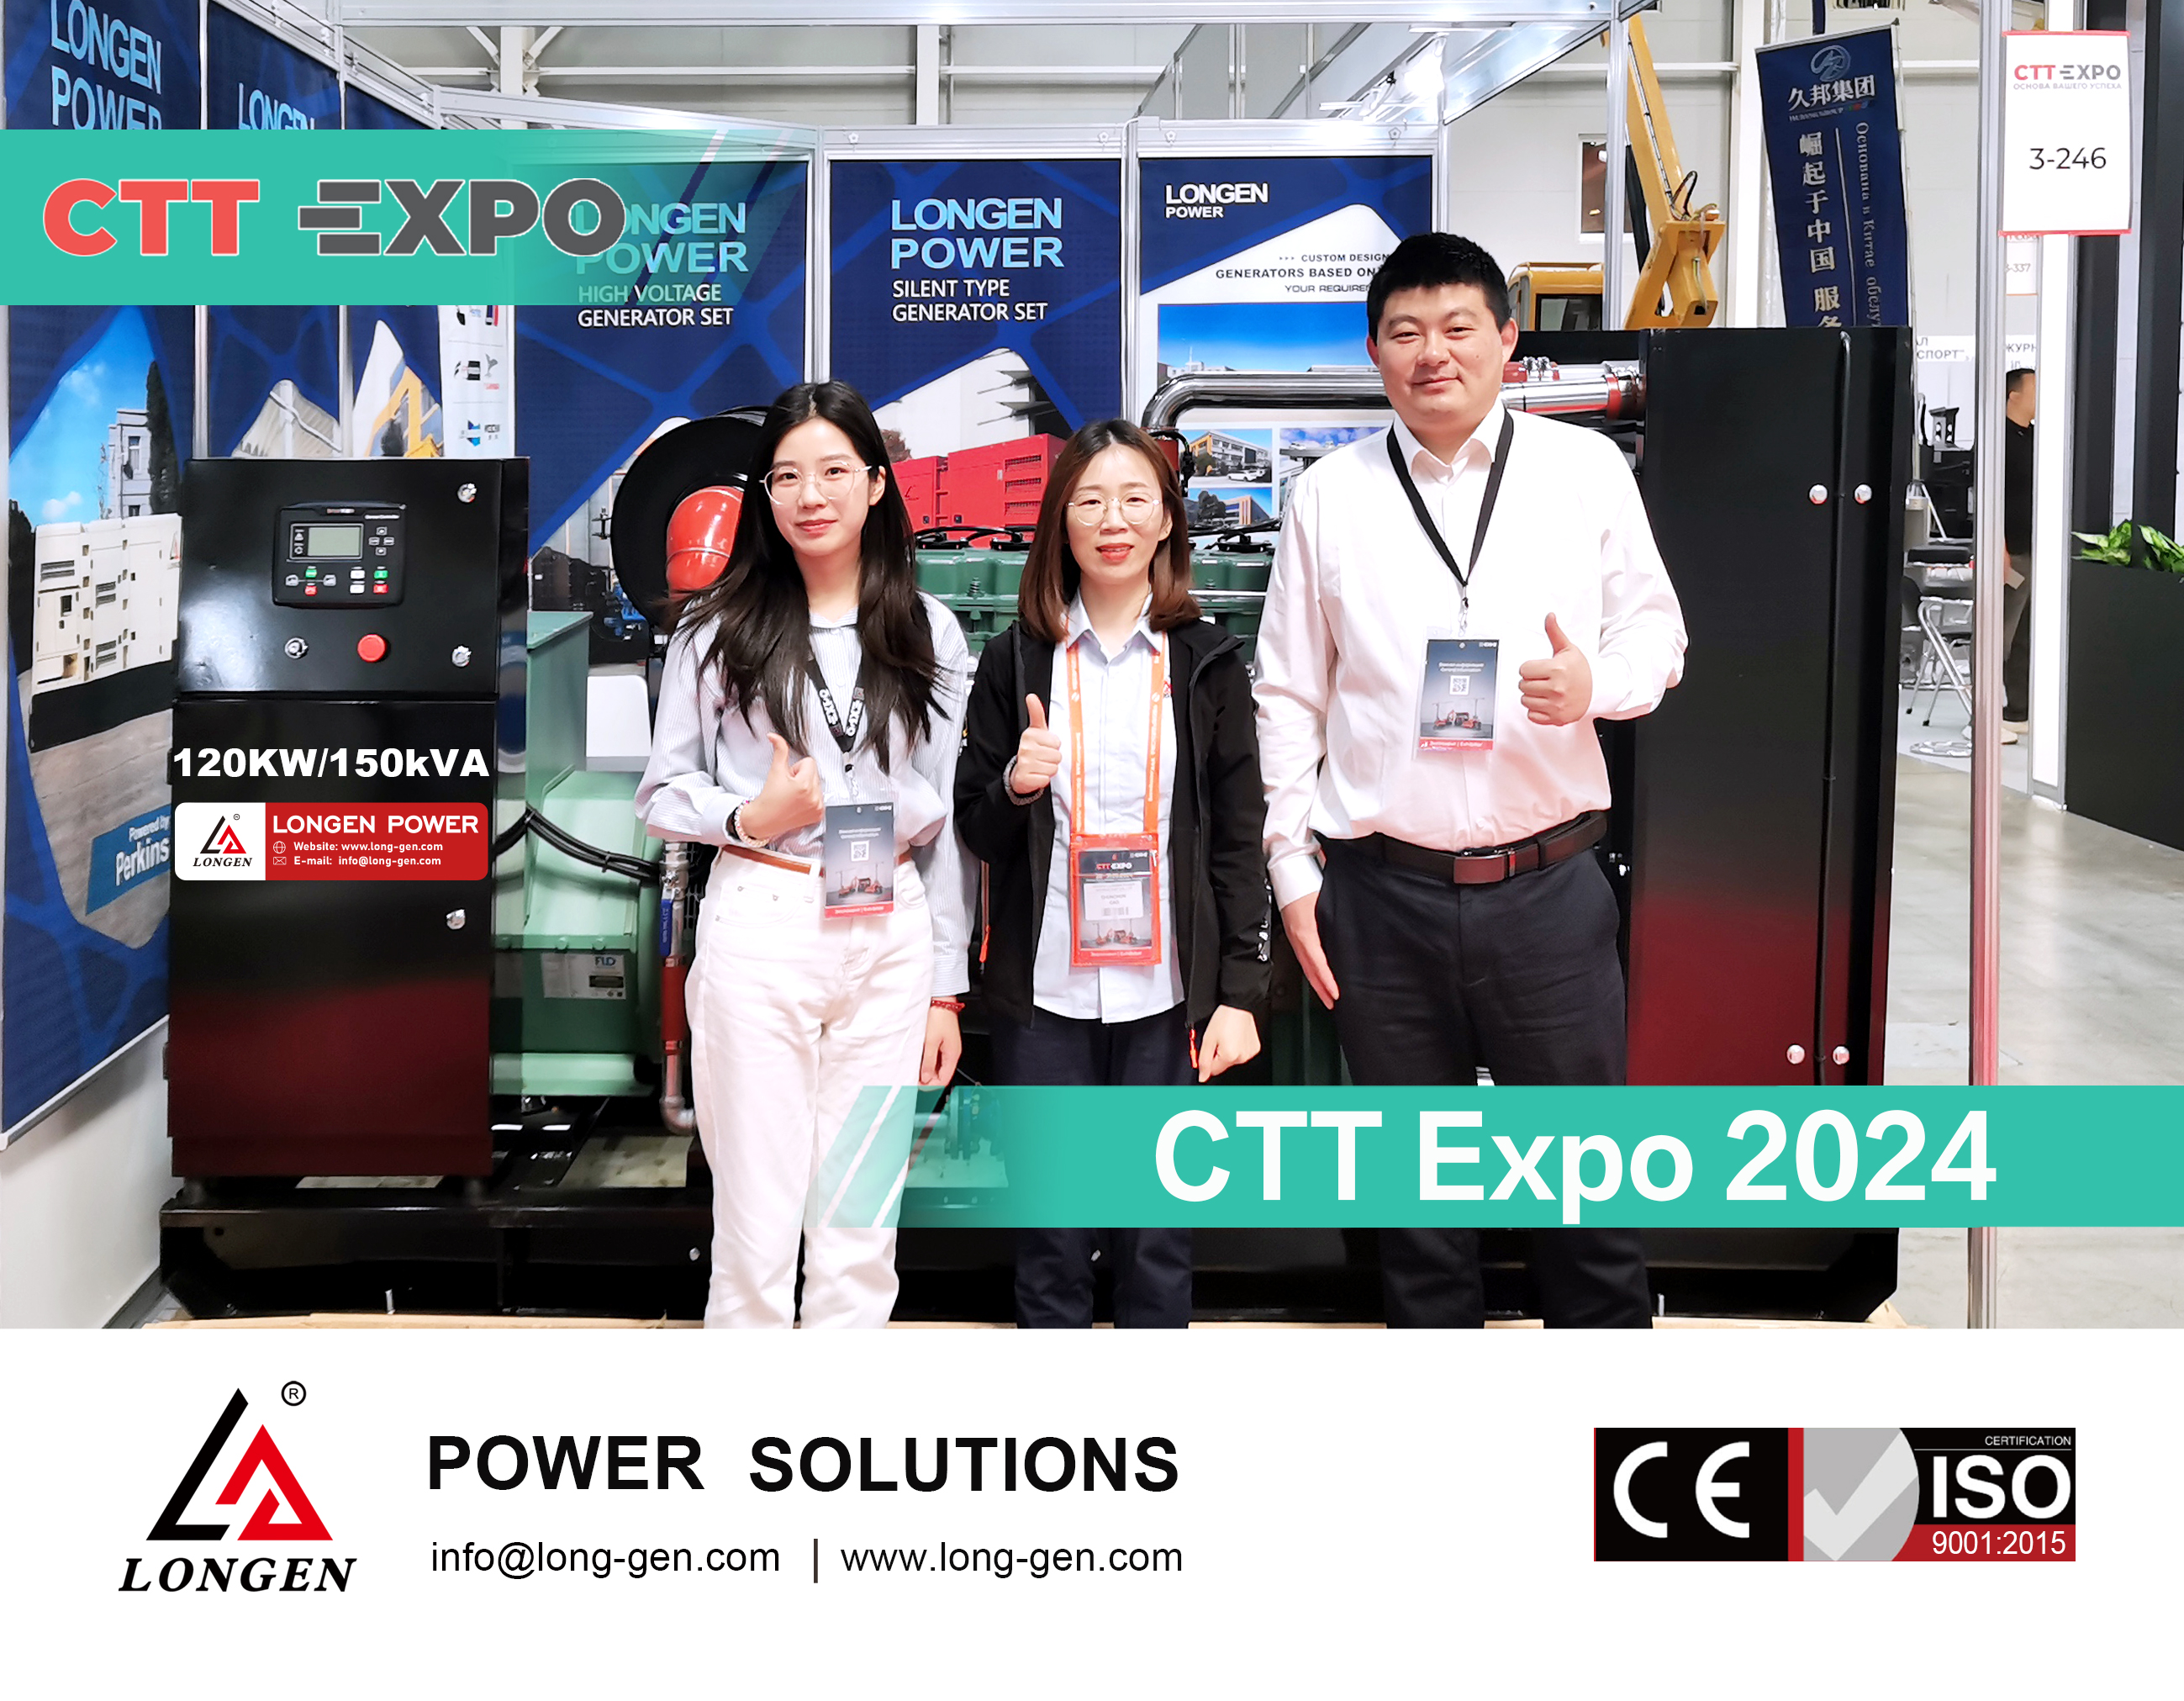 Longen Power brings natural gas generator sets to CTT Expo 2024 in Moscow